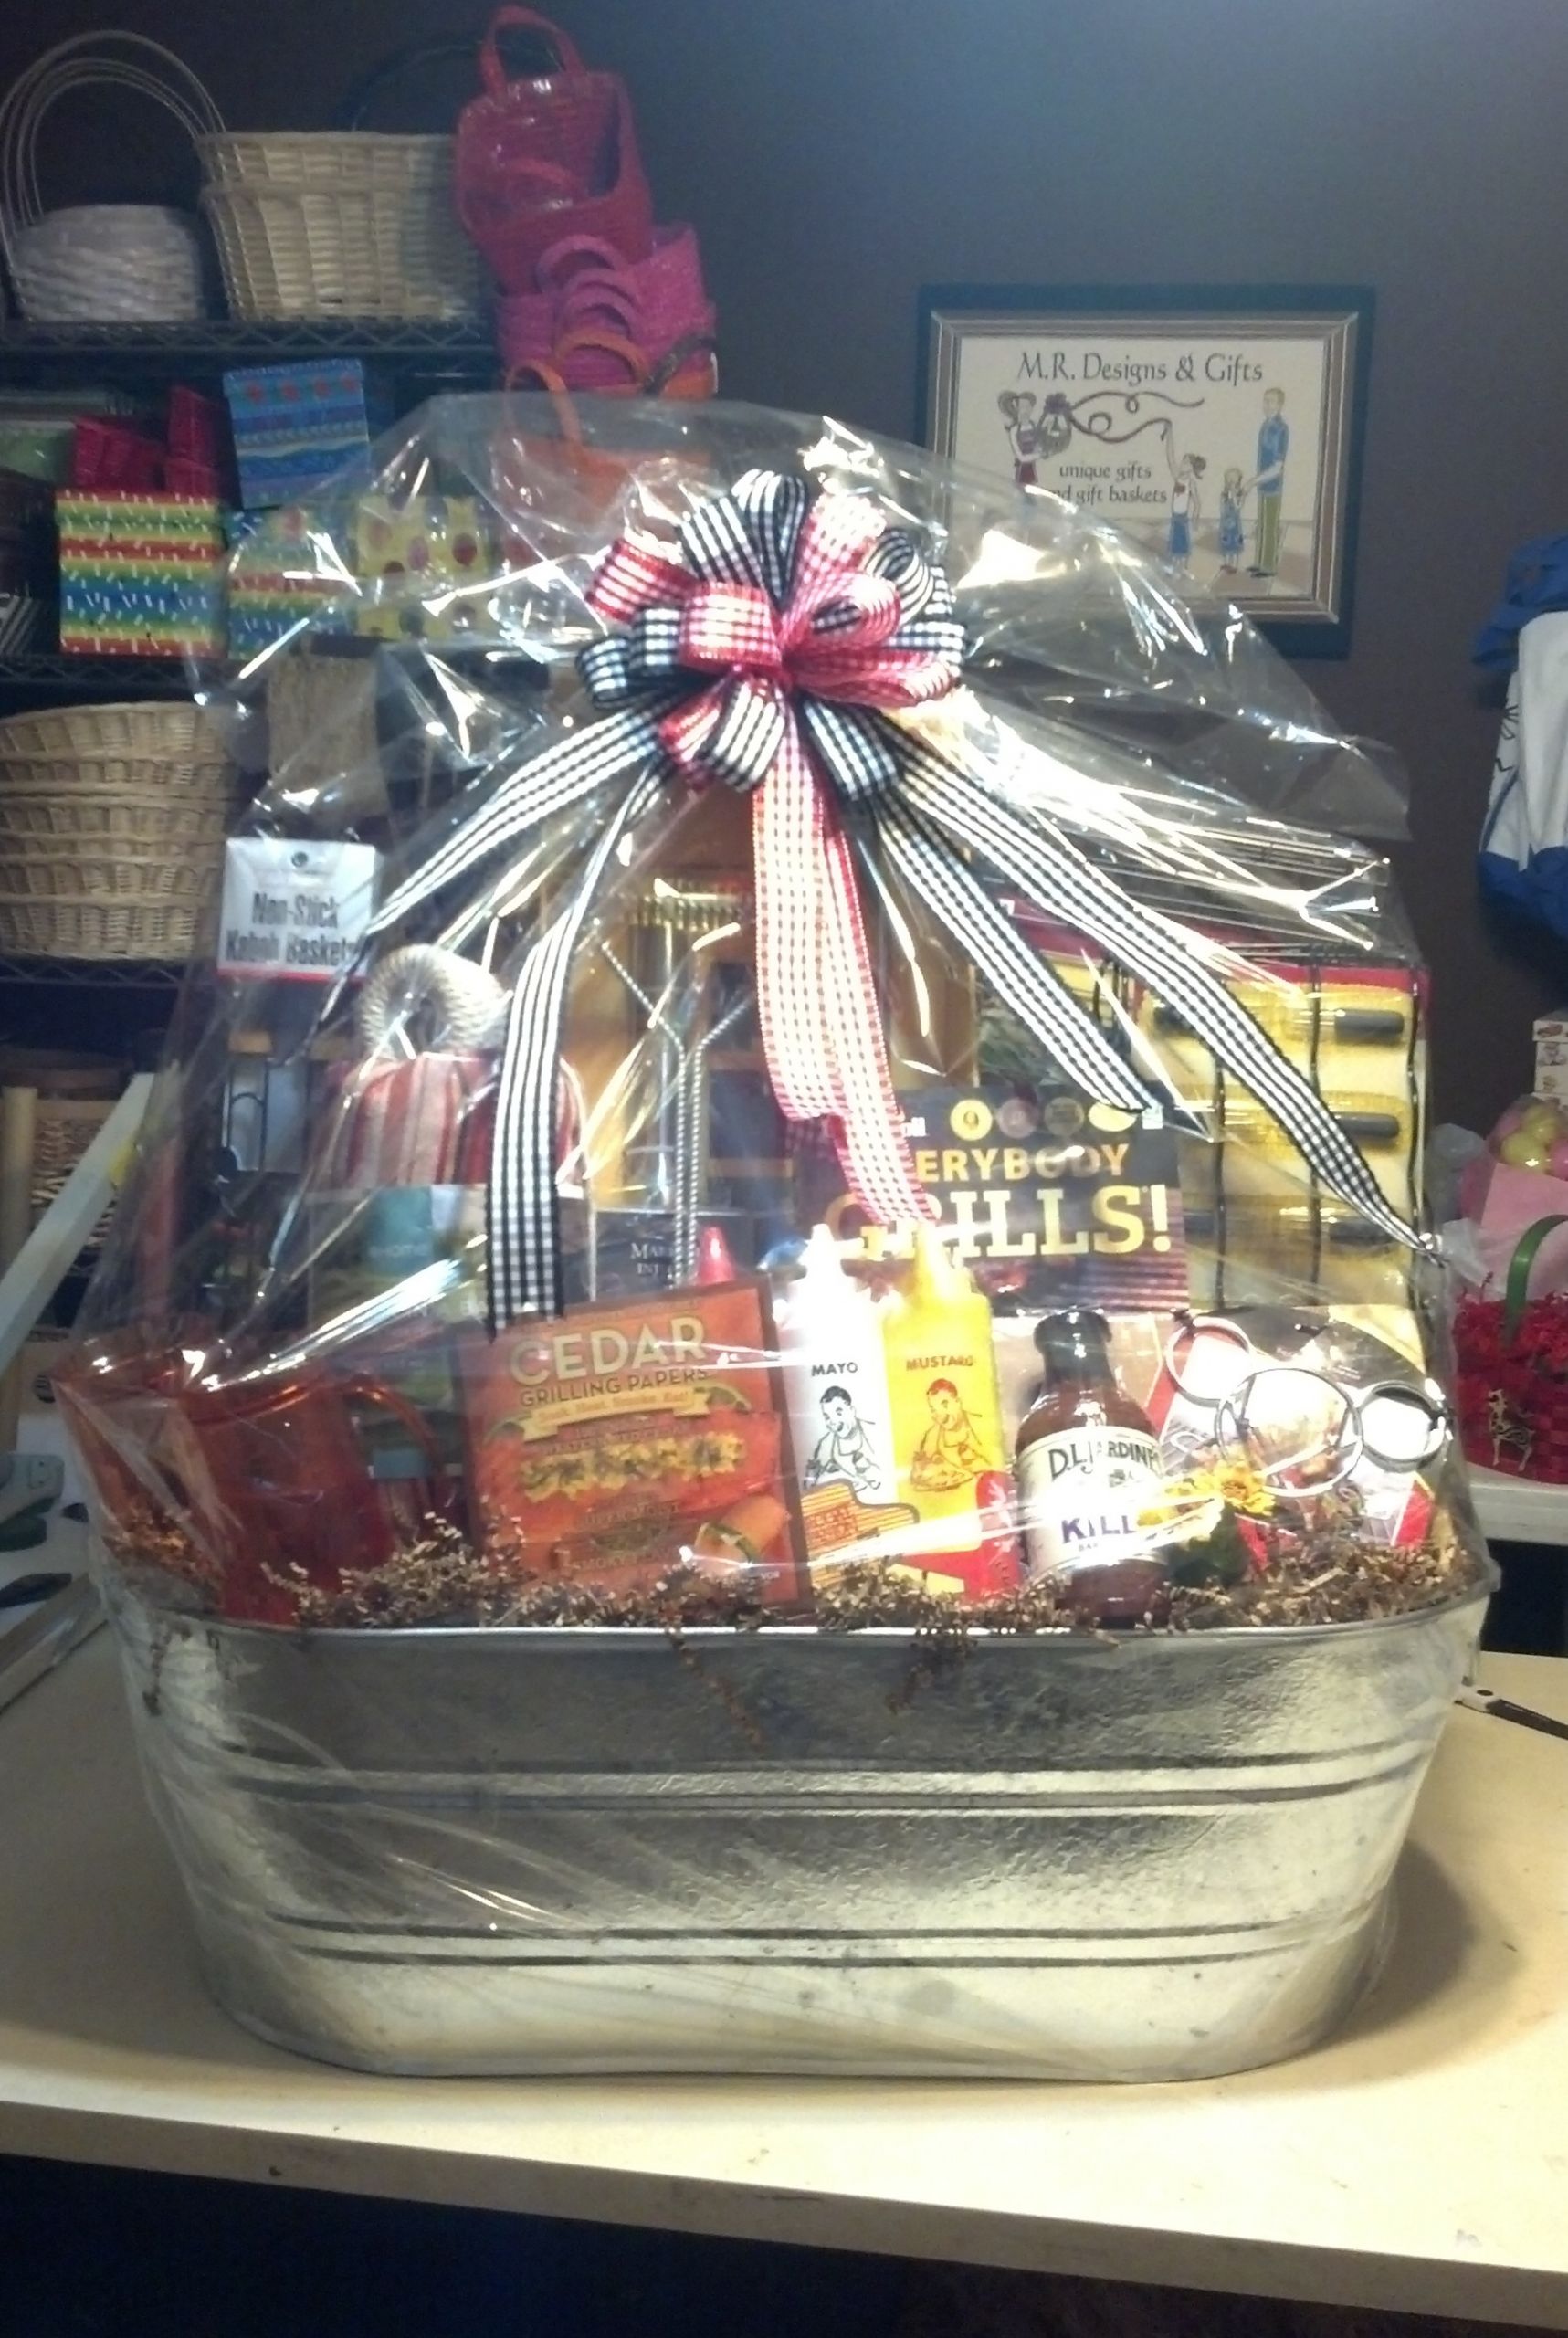 Gift Basket Auction Ideas
 Special Event and Silent Auction Gift Basket Ideas by M R